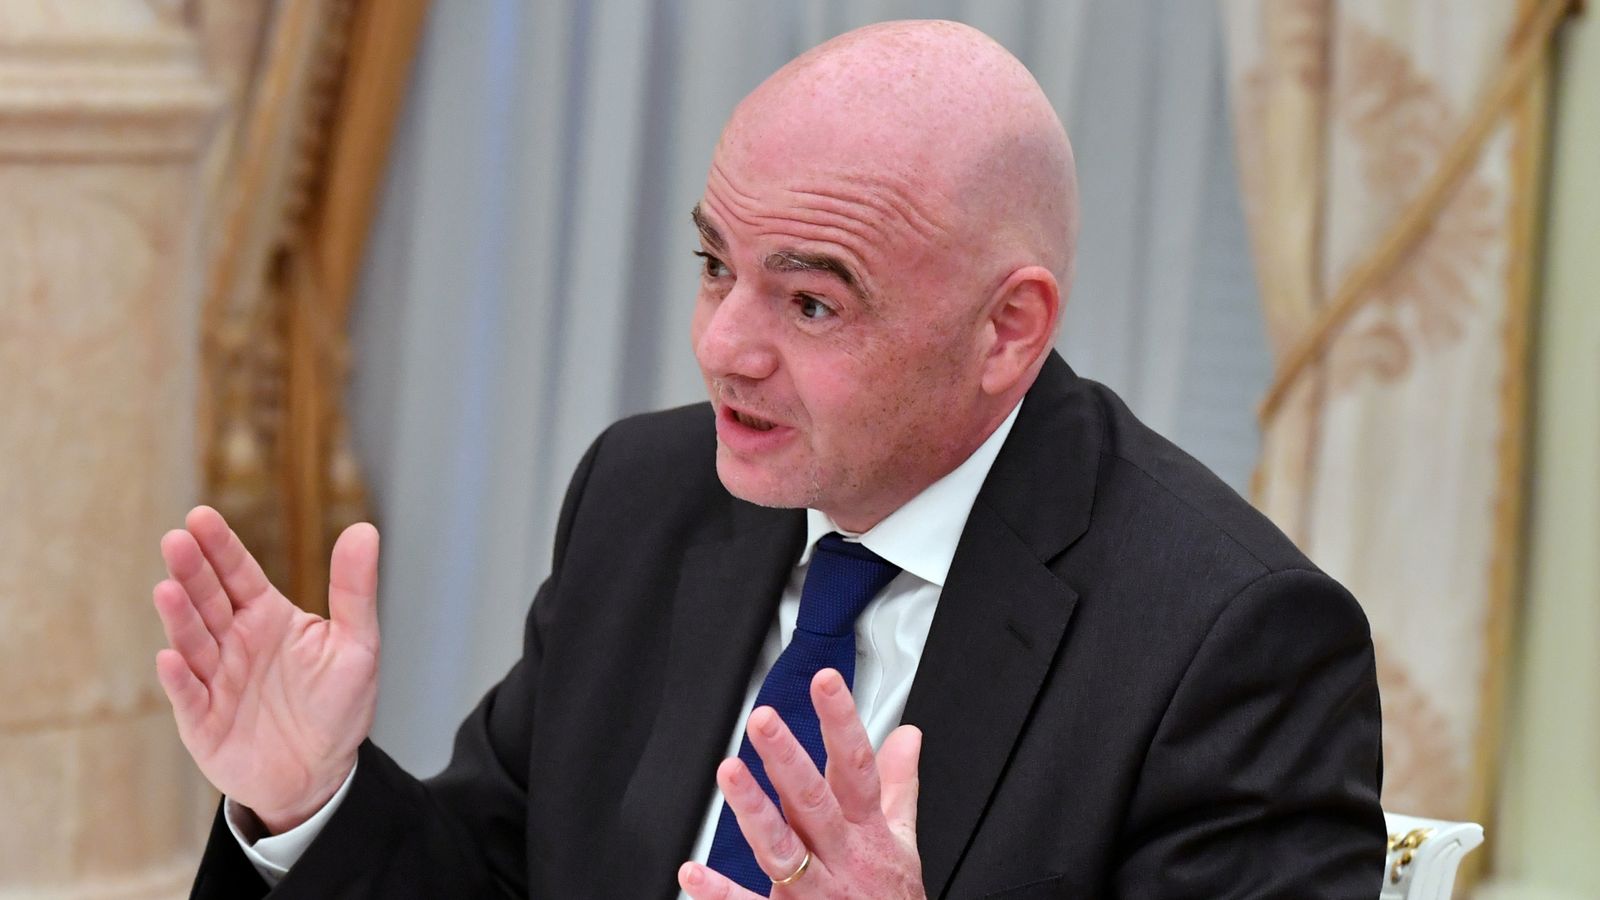 FIFA president Gianni Infantino says World Cup every two years could mean African migrants 'don't need to die in the sea'